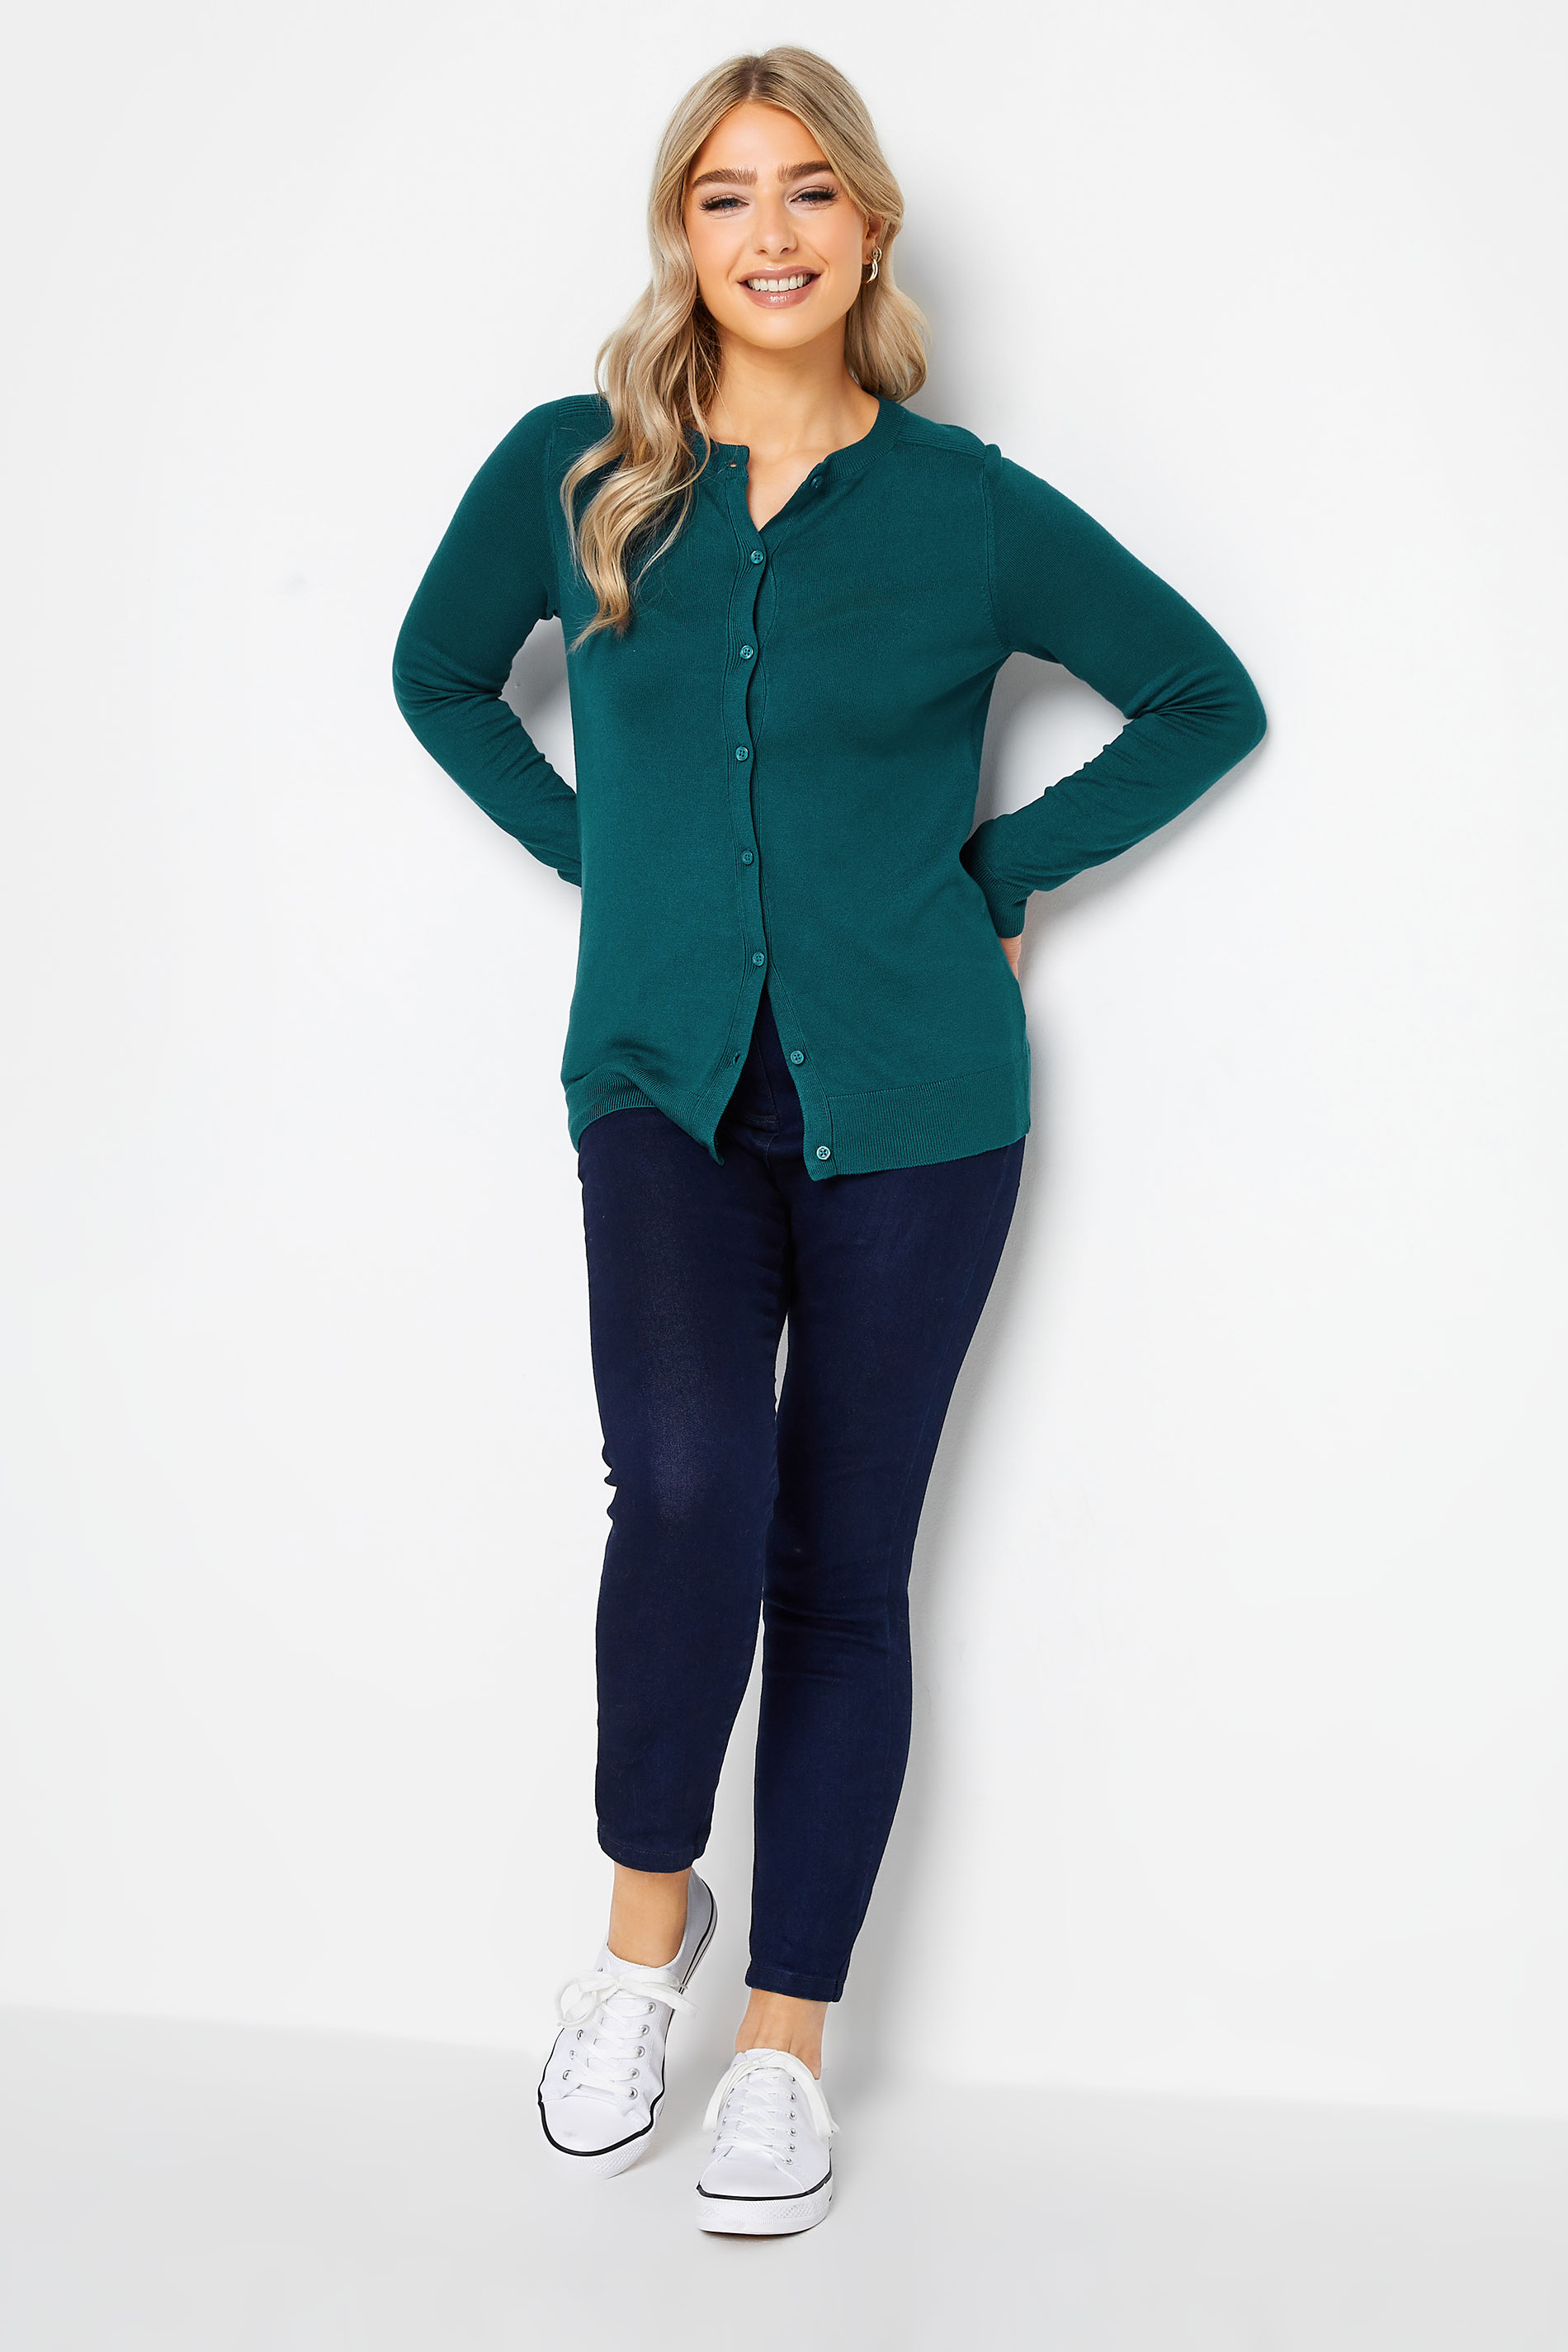 M&Co Teal Green Button Up Ribbed Shoulder Cardigan | M&Co 2